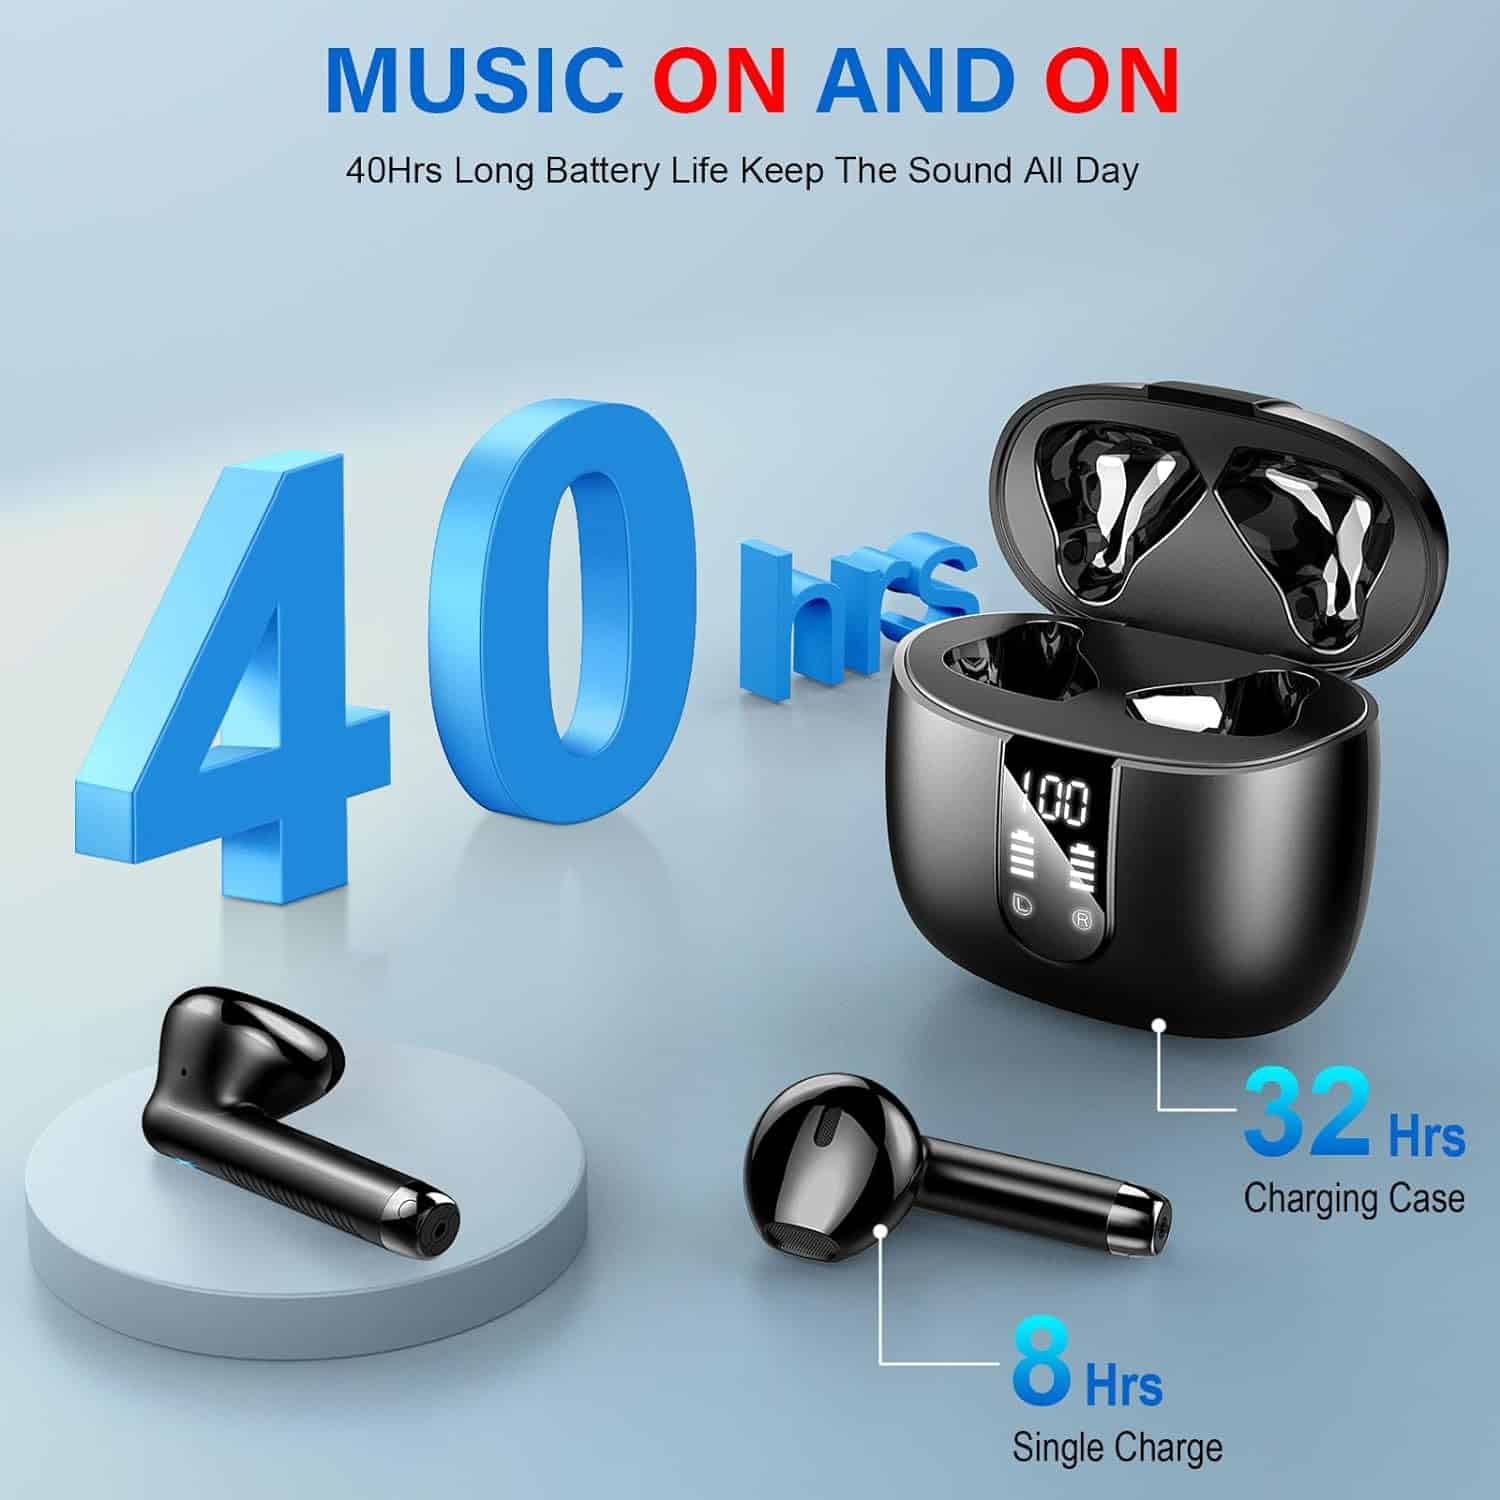 Wireless Earbud Bluetooth 5.3 Headphones: A Game-Changer in Wireless Audio